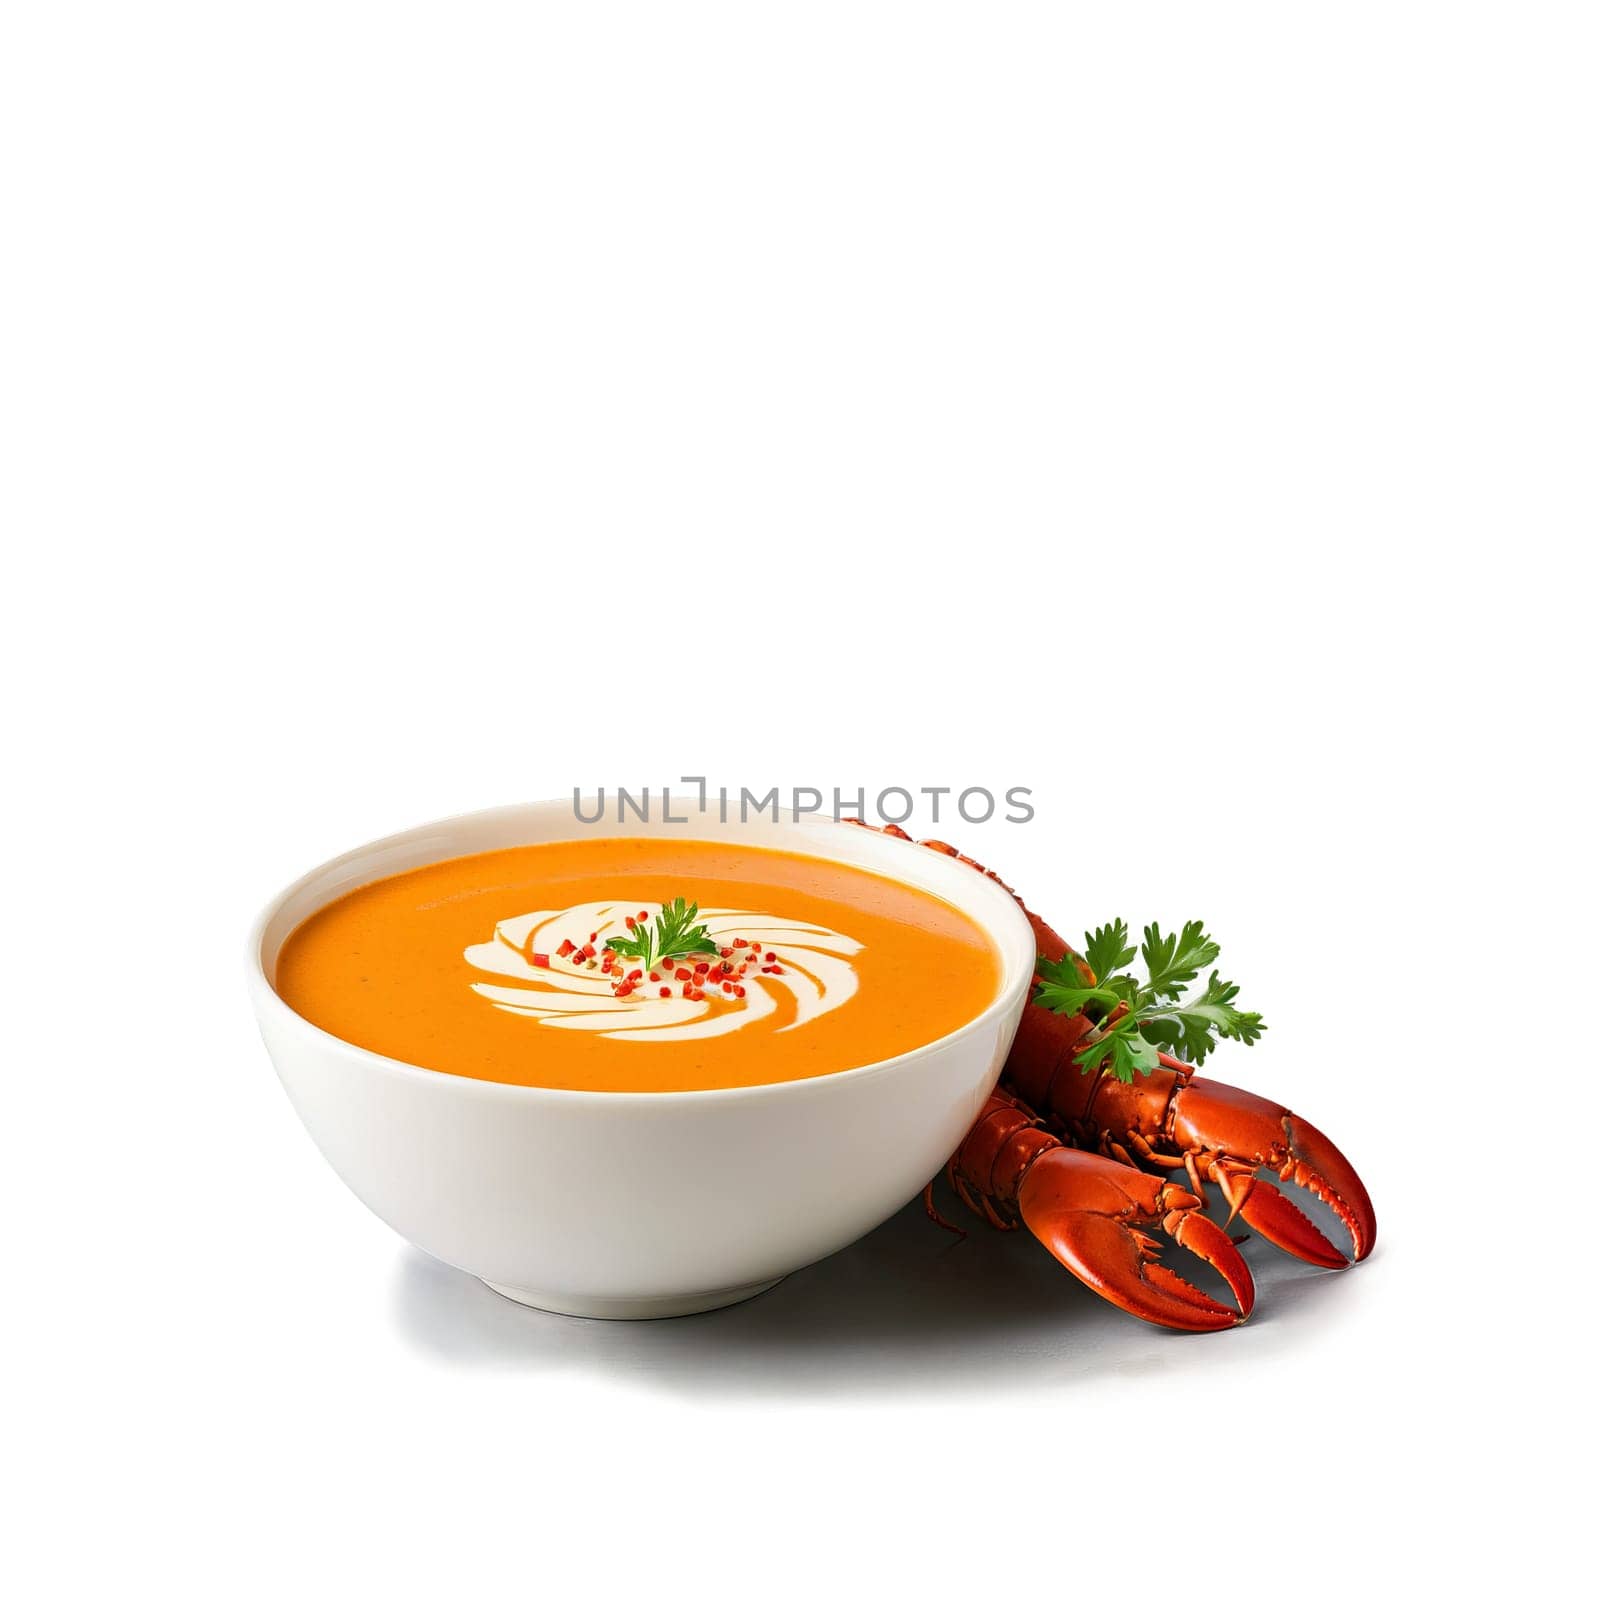 Lobster bisque creamy and rich served in a white bowl garnished with a swirl of by panophotograph